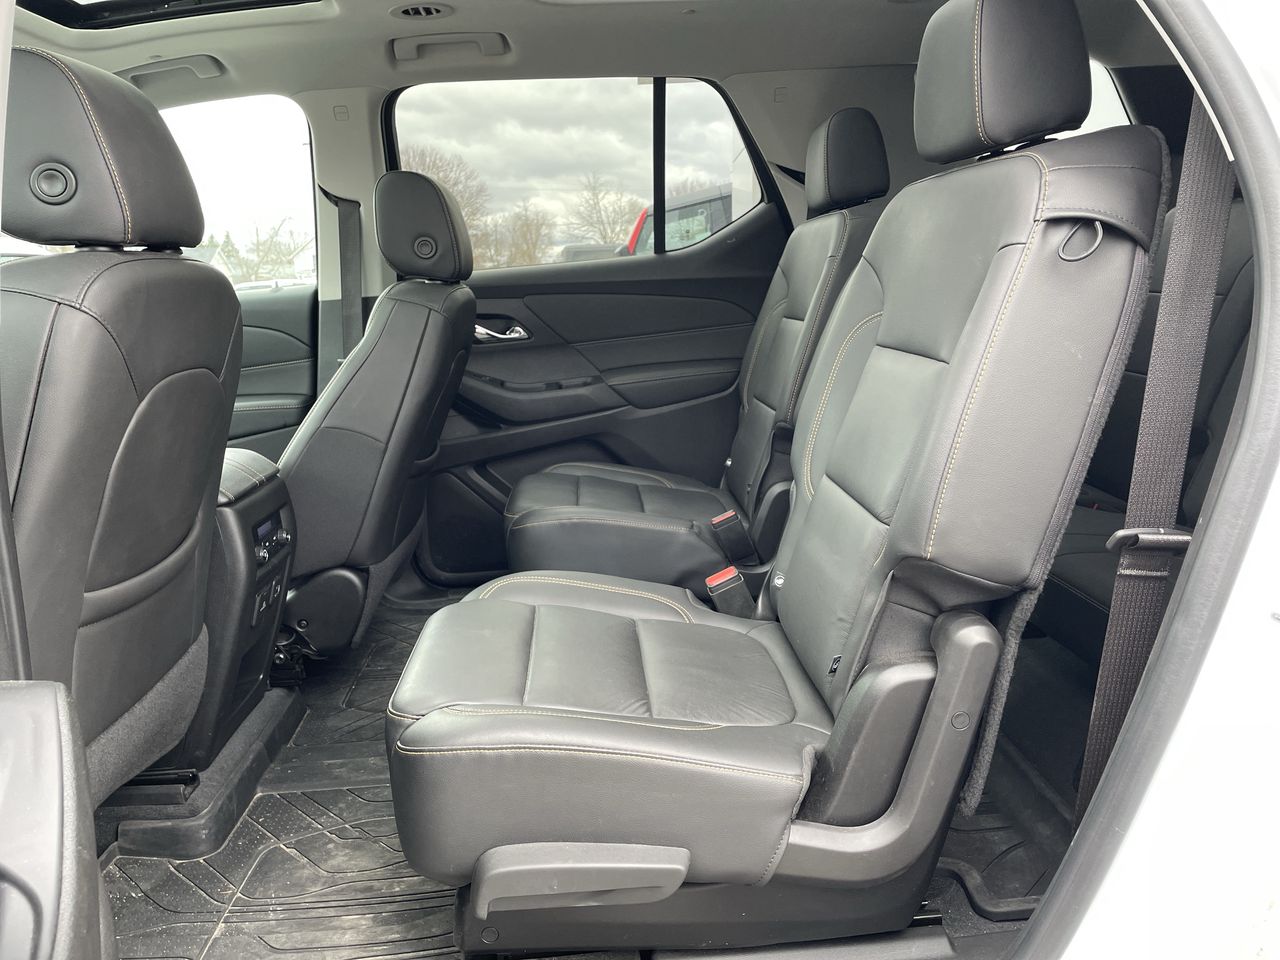 2021 Chevrolet Traverse - 21525A Full Image 13